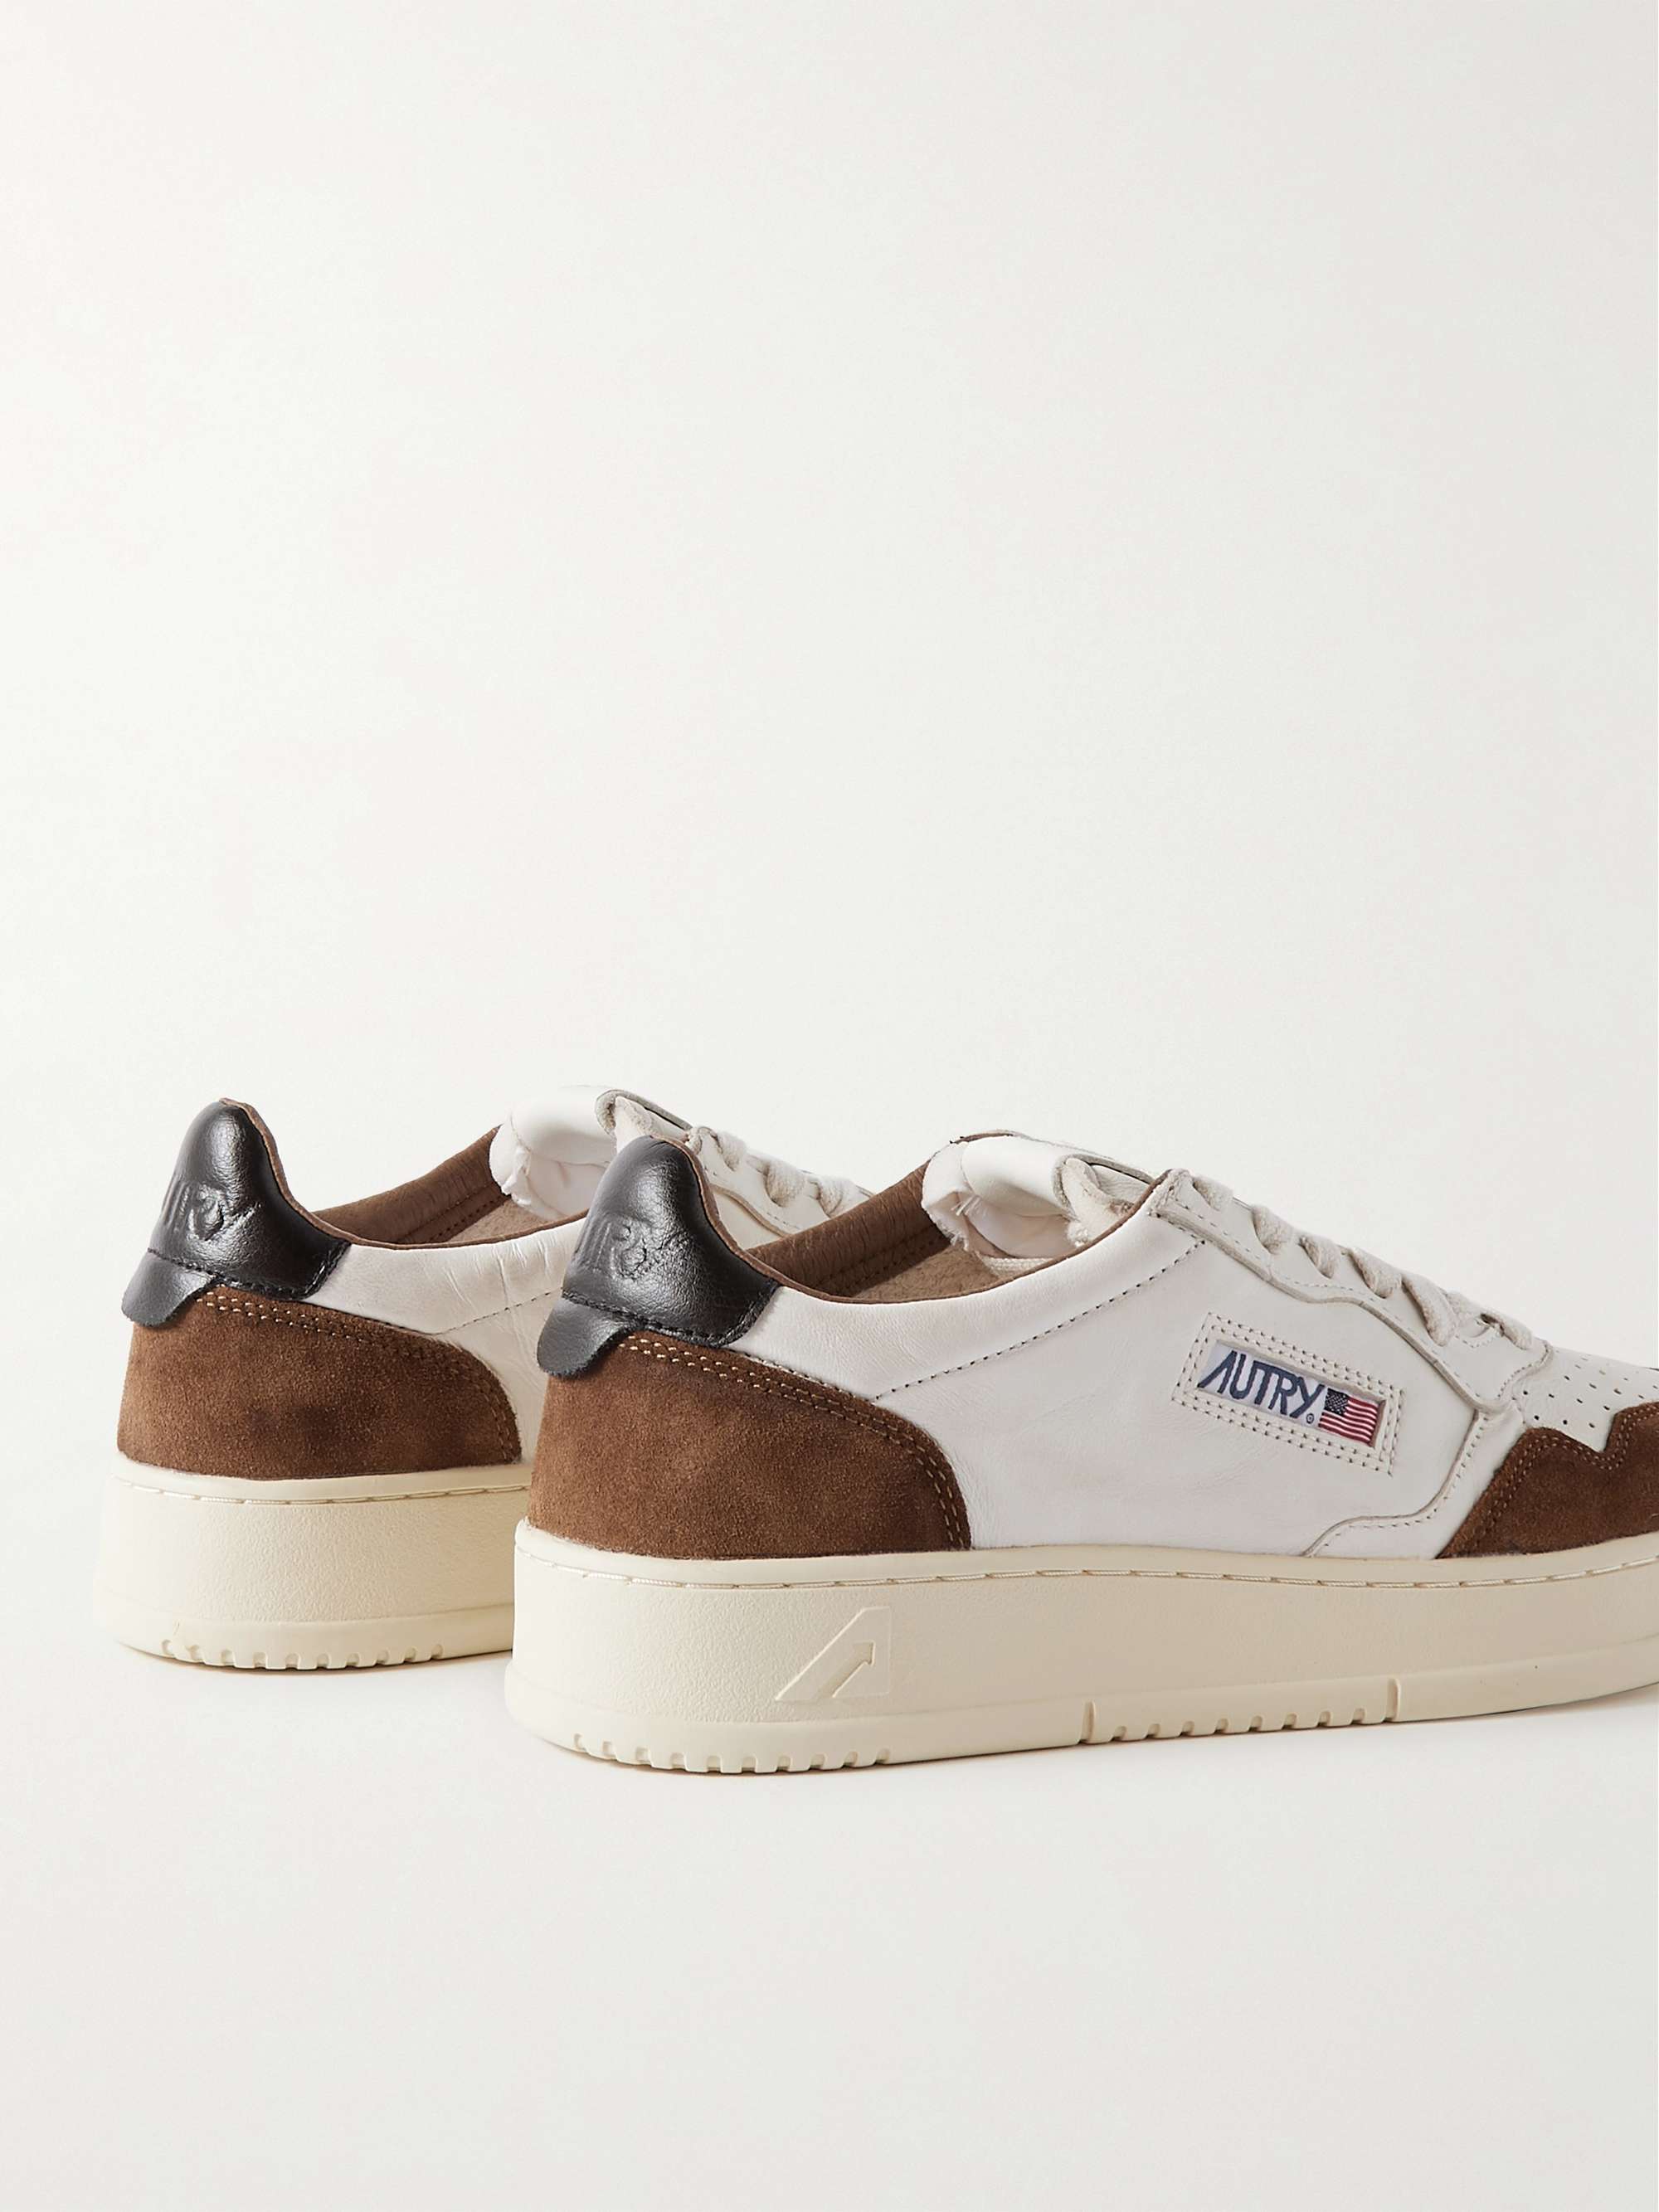 AUTRY Medalist Leather-Trimmed Suede Sneakers for Men | MR PORTER